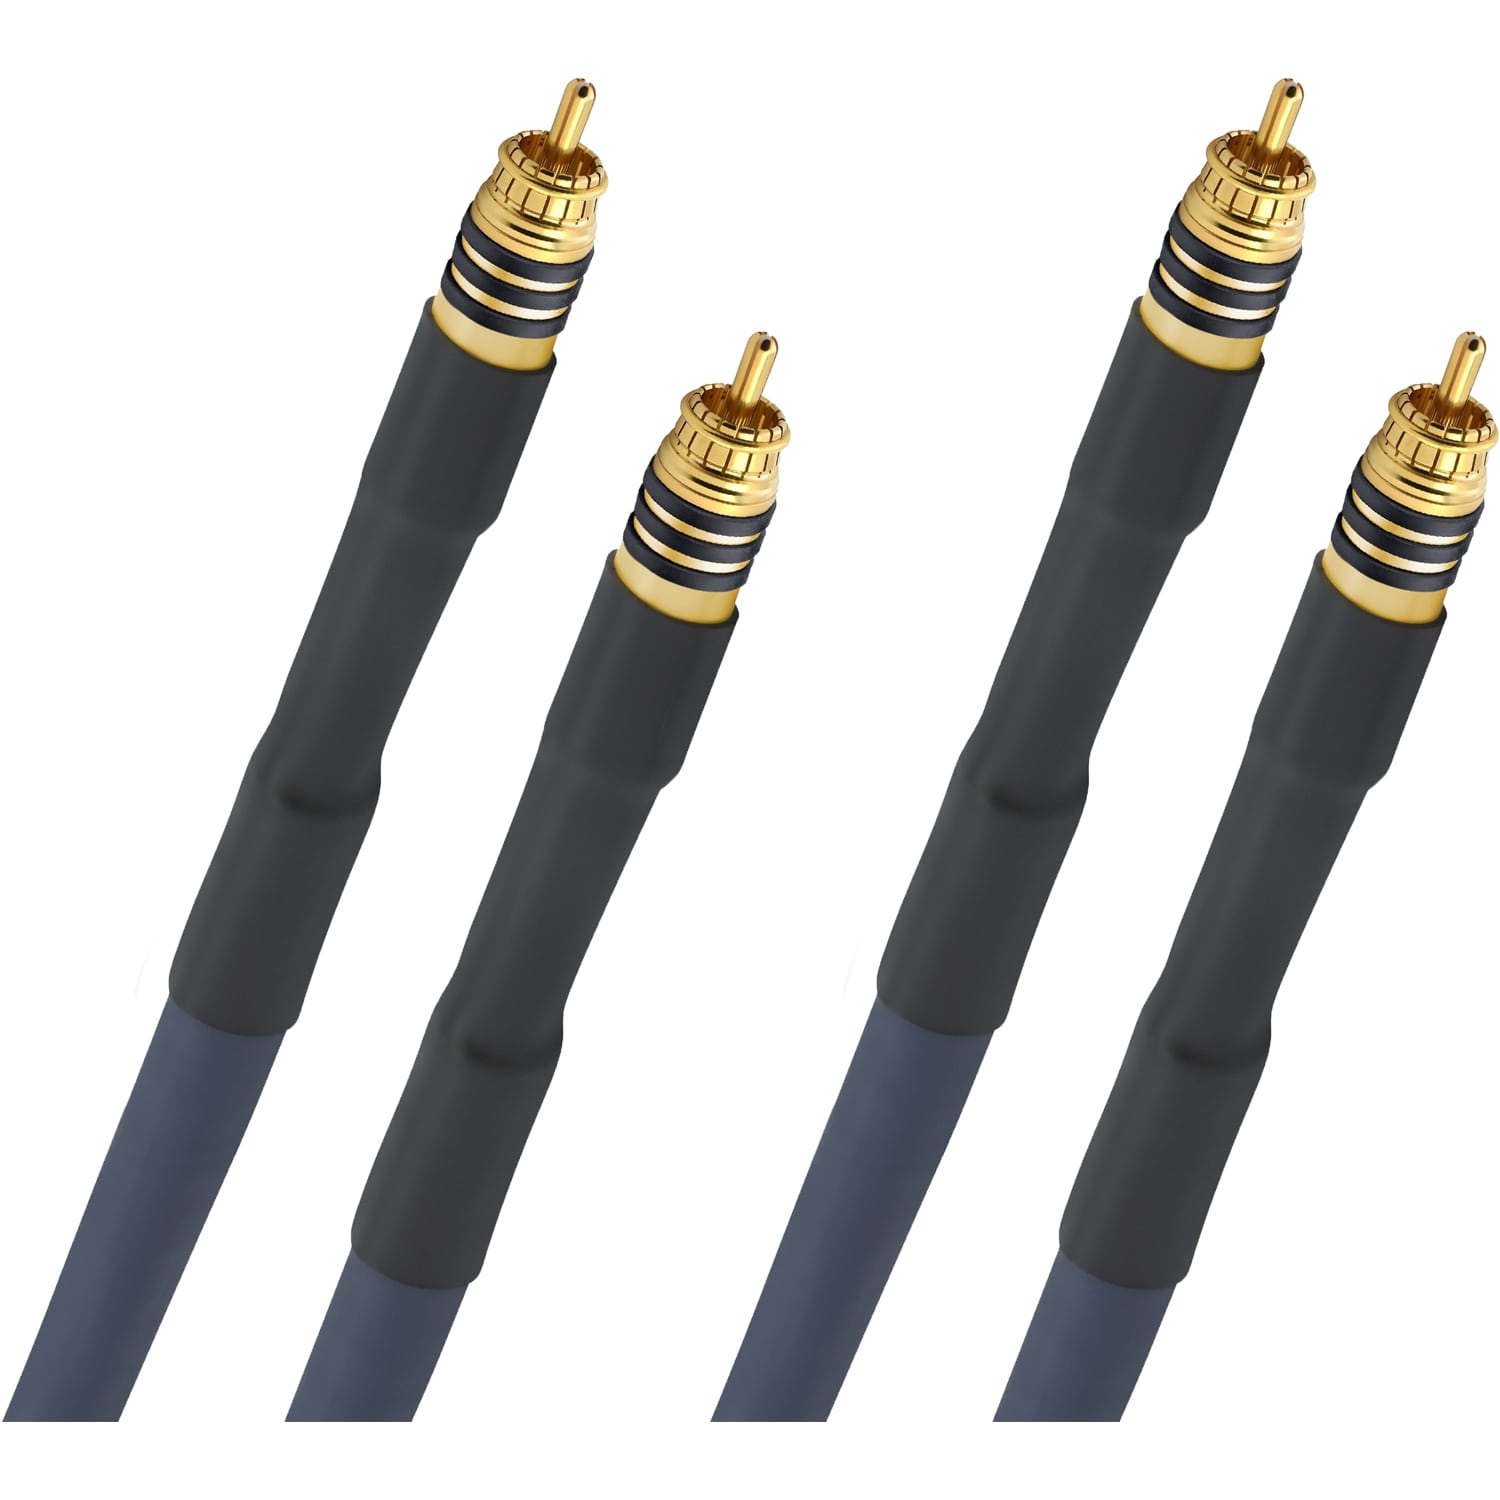 Кабели межблочные аудио Oehlbach STATE OF THE ART XXL Cable RCA, 2x2,00m, gold, D1C13116 кабели межблочные аудио oehlbach excellence sub link subwoofer cable 5 0m bw d1c33162